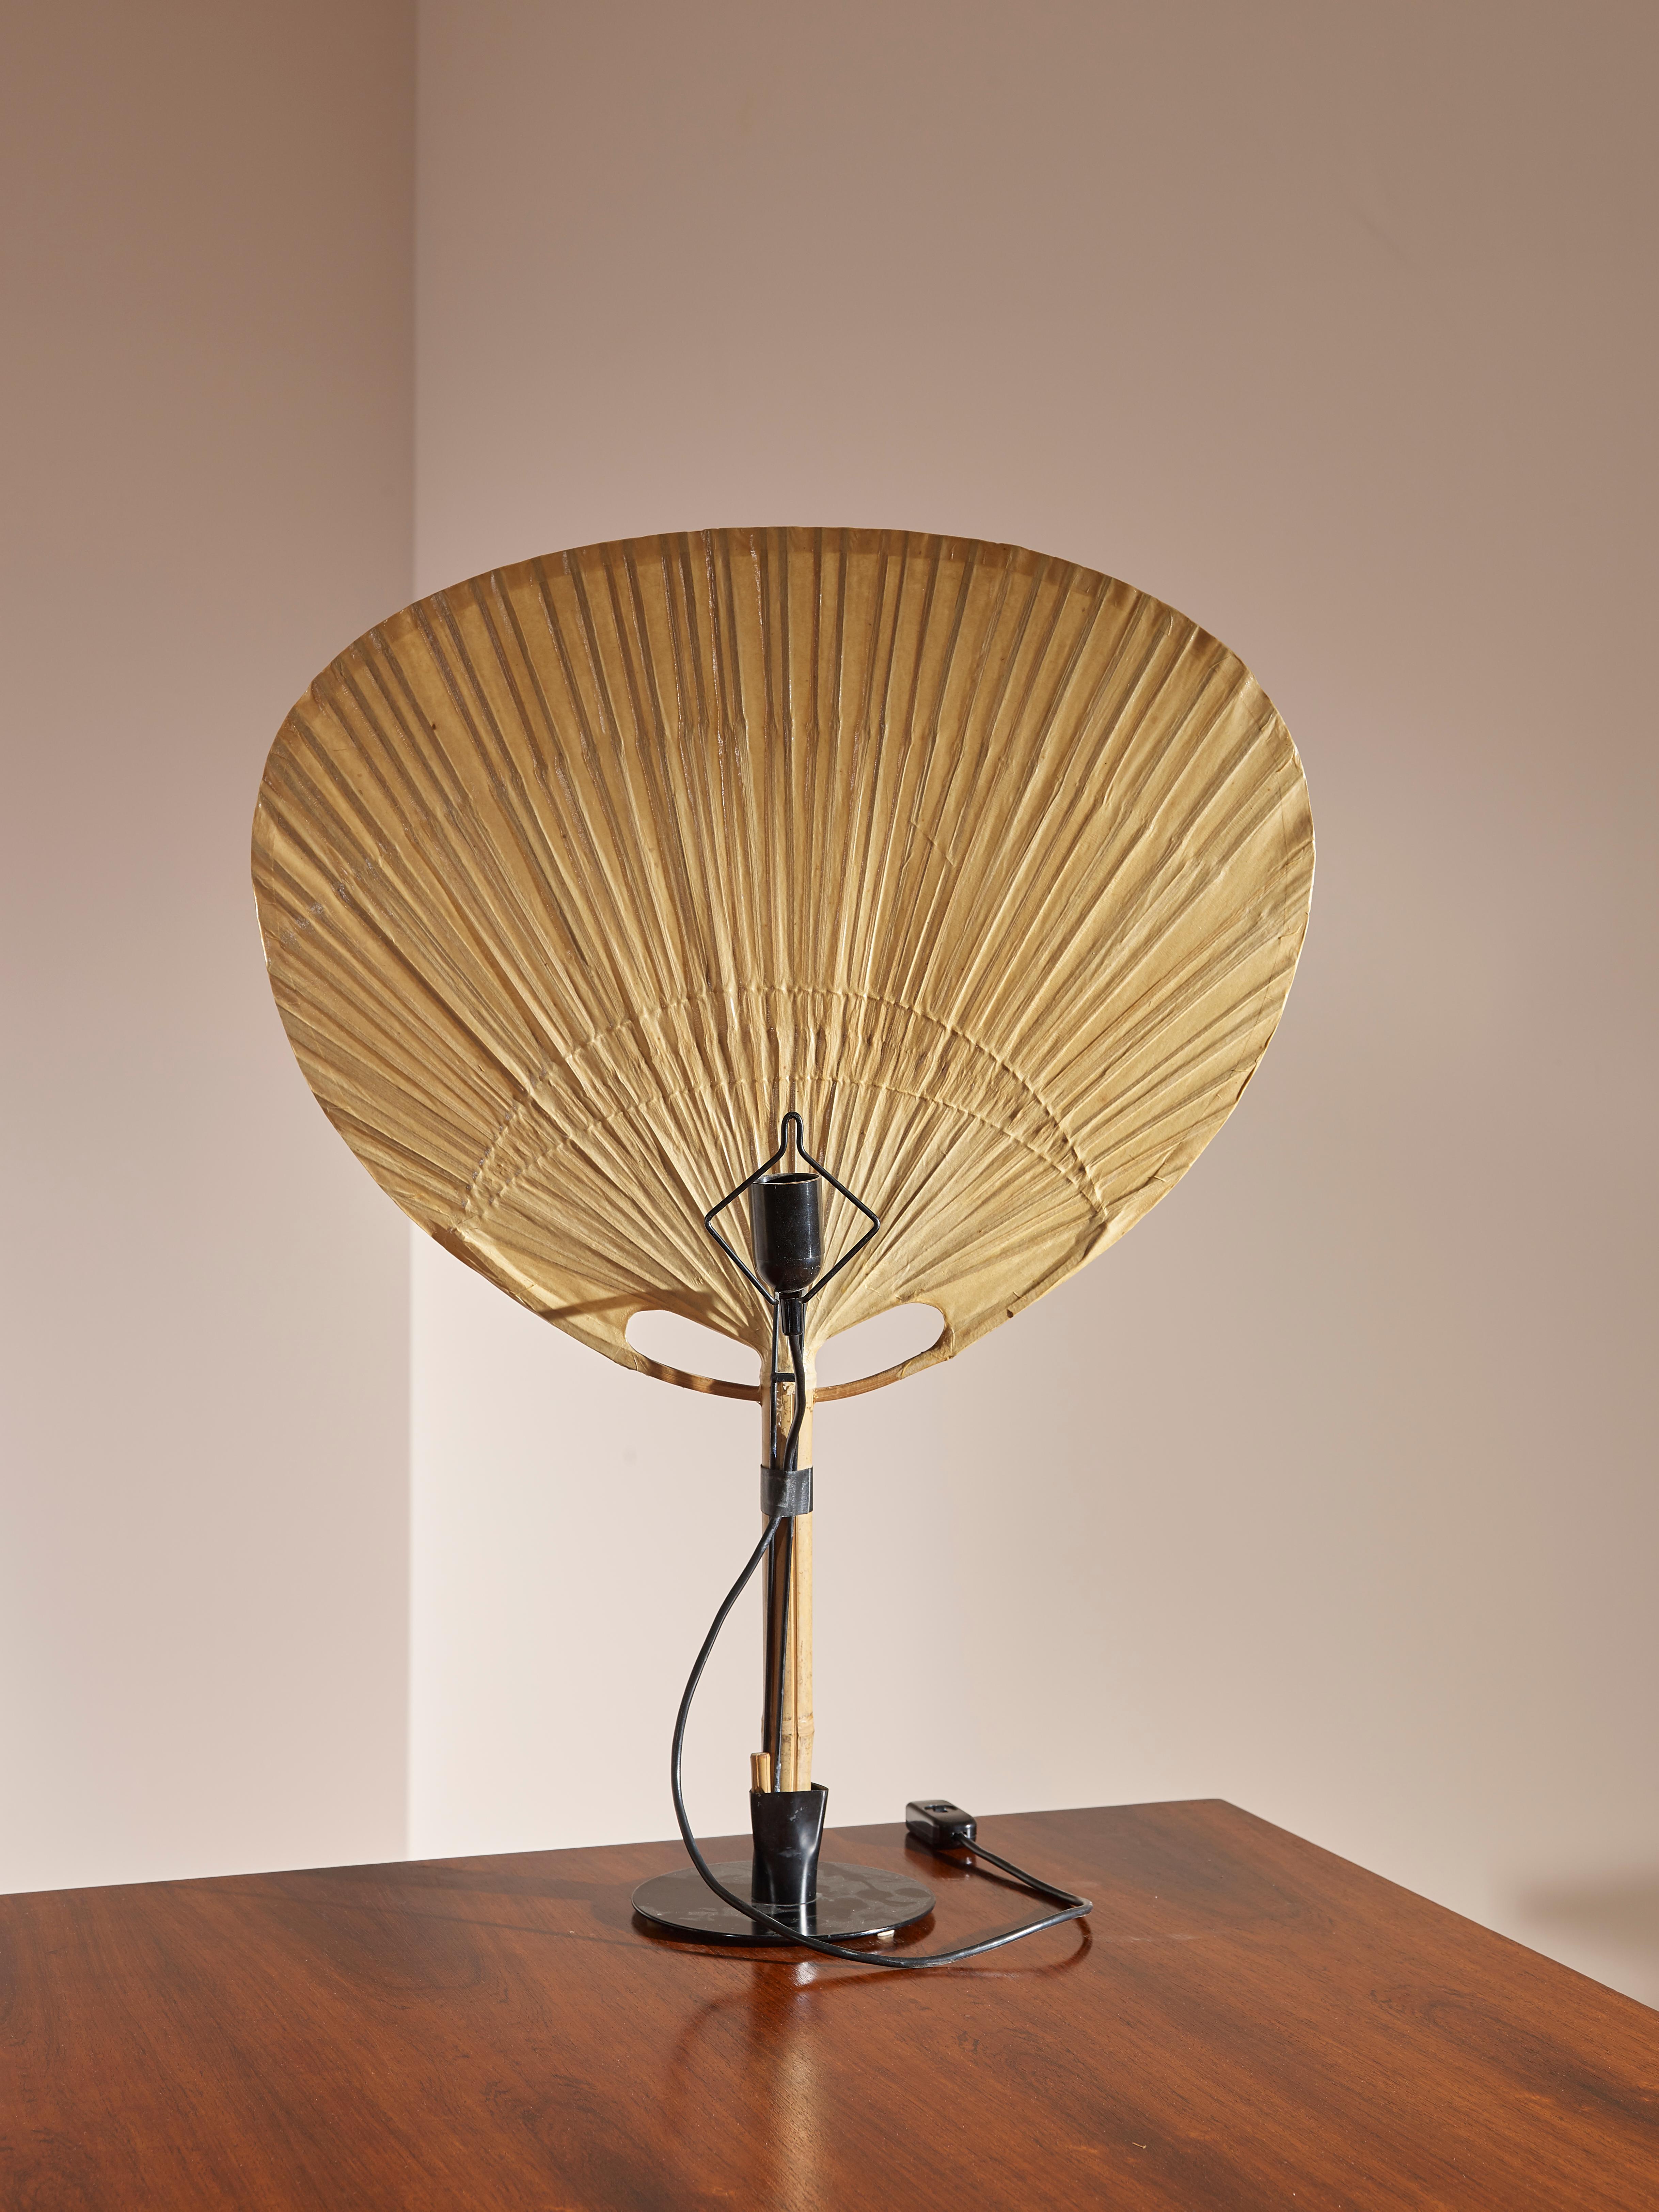 Late 20th Century ‘Uchiwa’ Table Lamp by Ingo Maurer for M Design, Germany, 1977